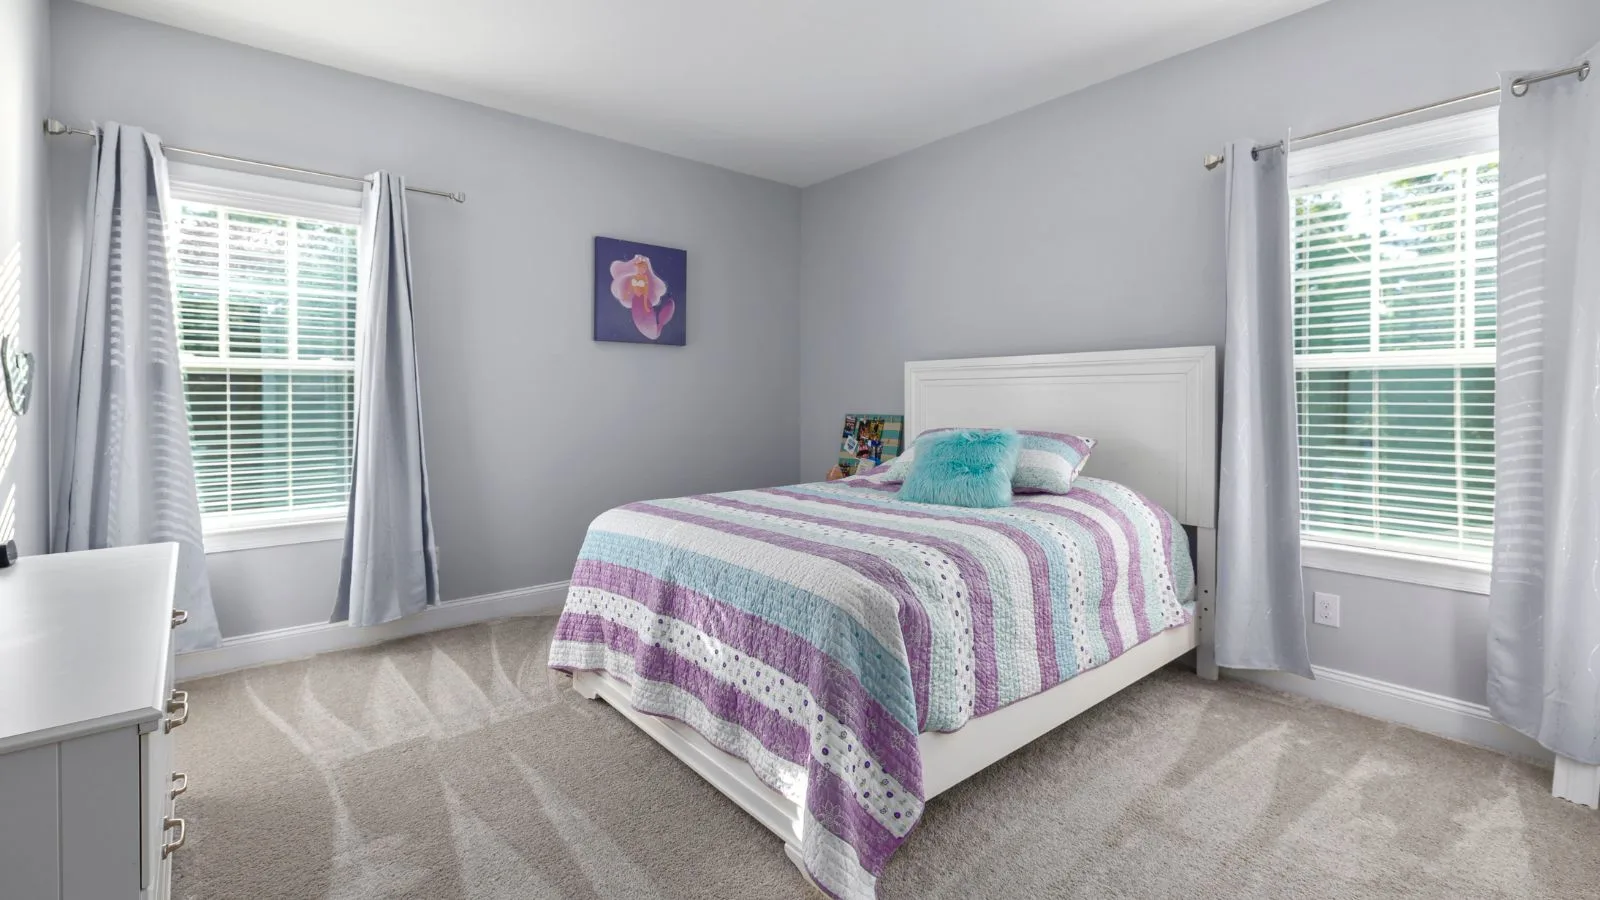 How to Choose the Best Carpet Color for Your Bedroom